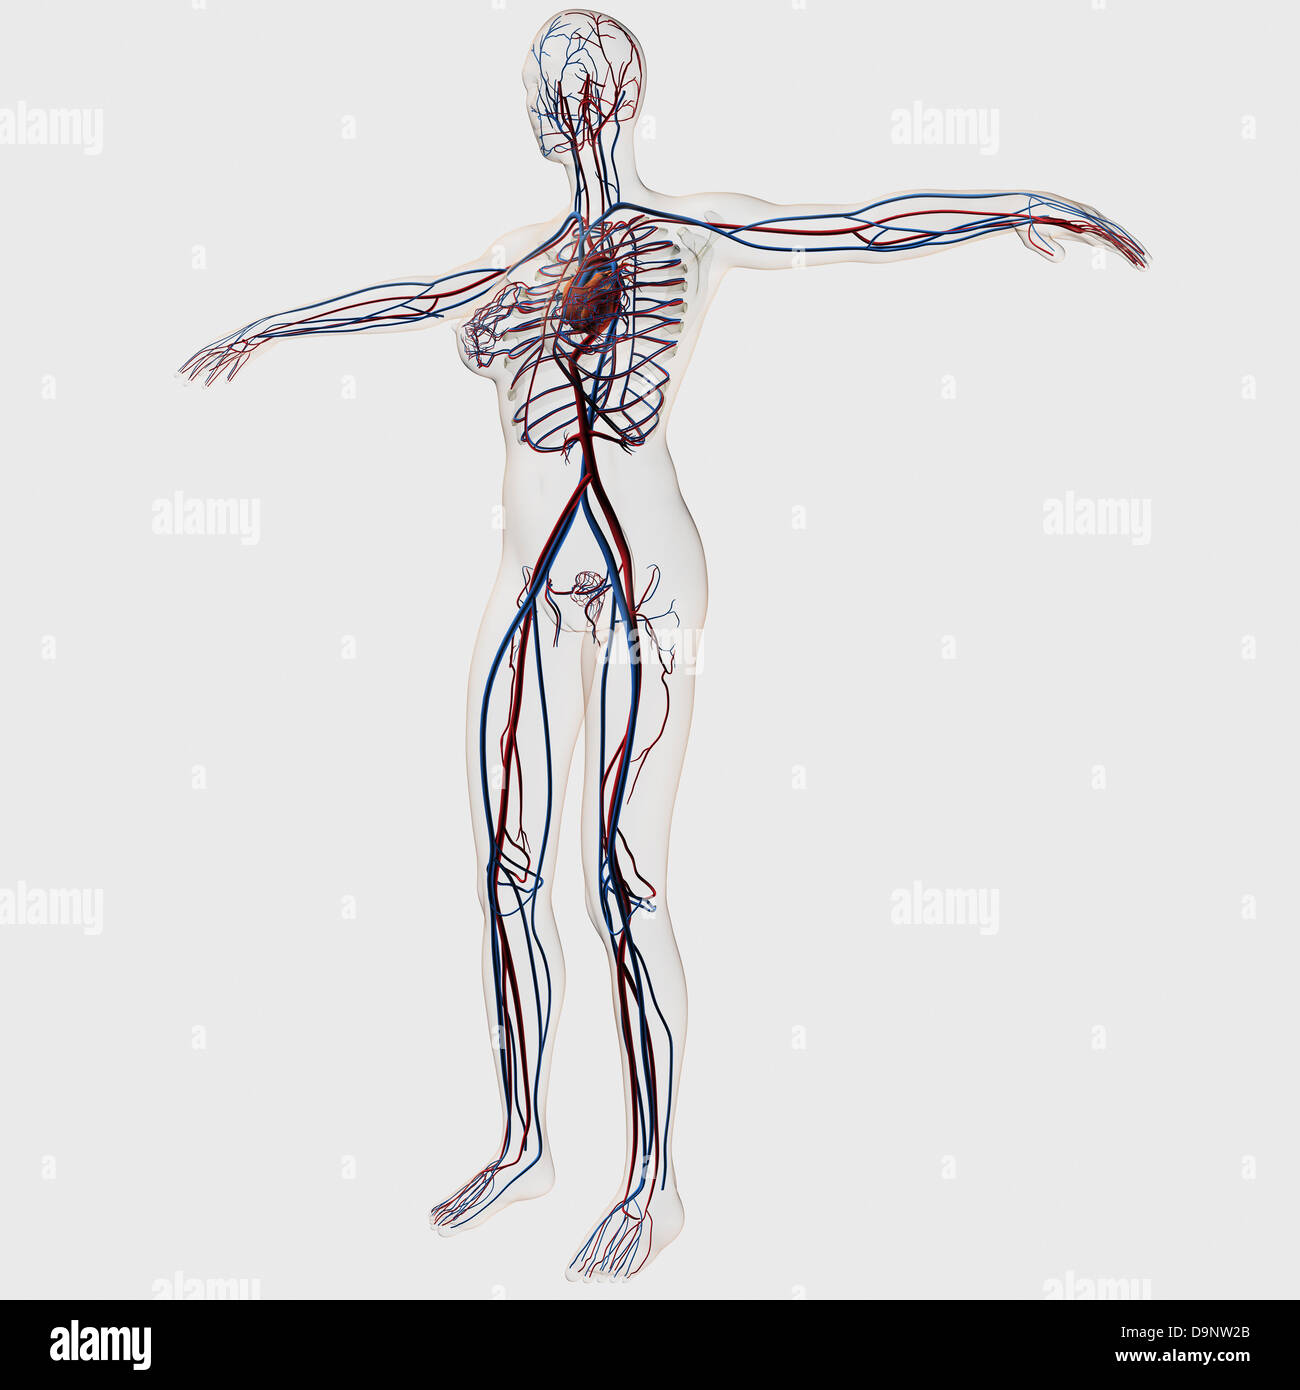 Medical illustration of female circulatory system showing arteries and veins with heart at center. Stock Photo